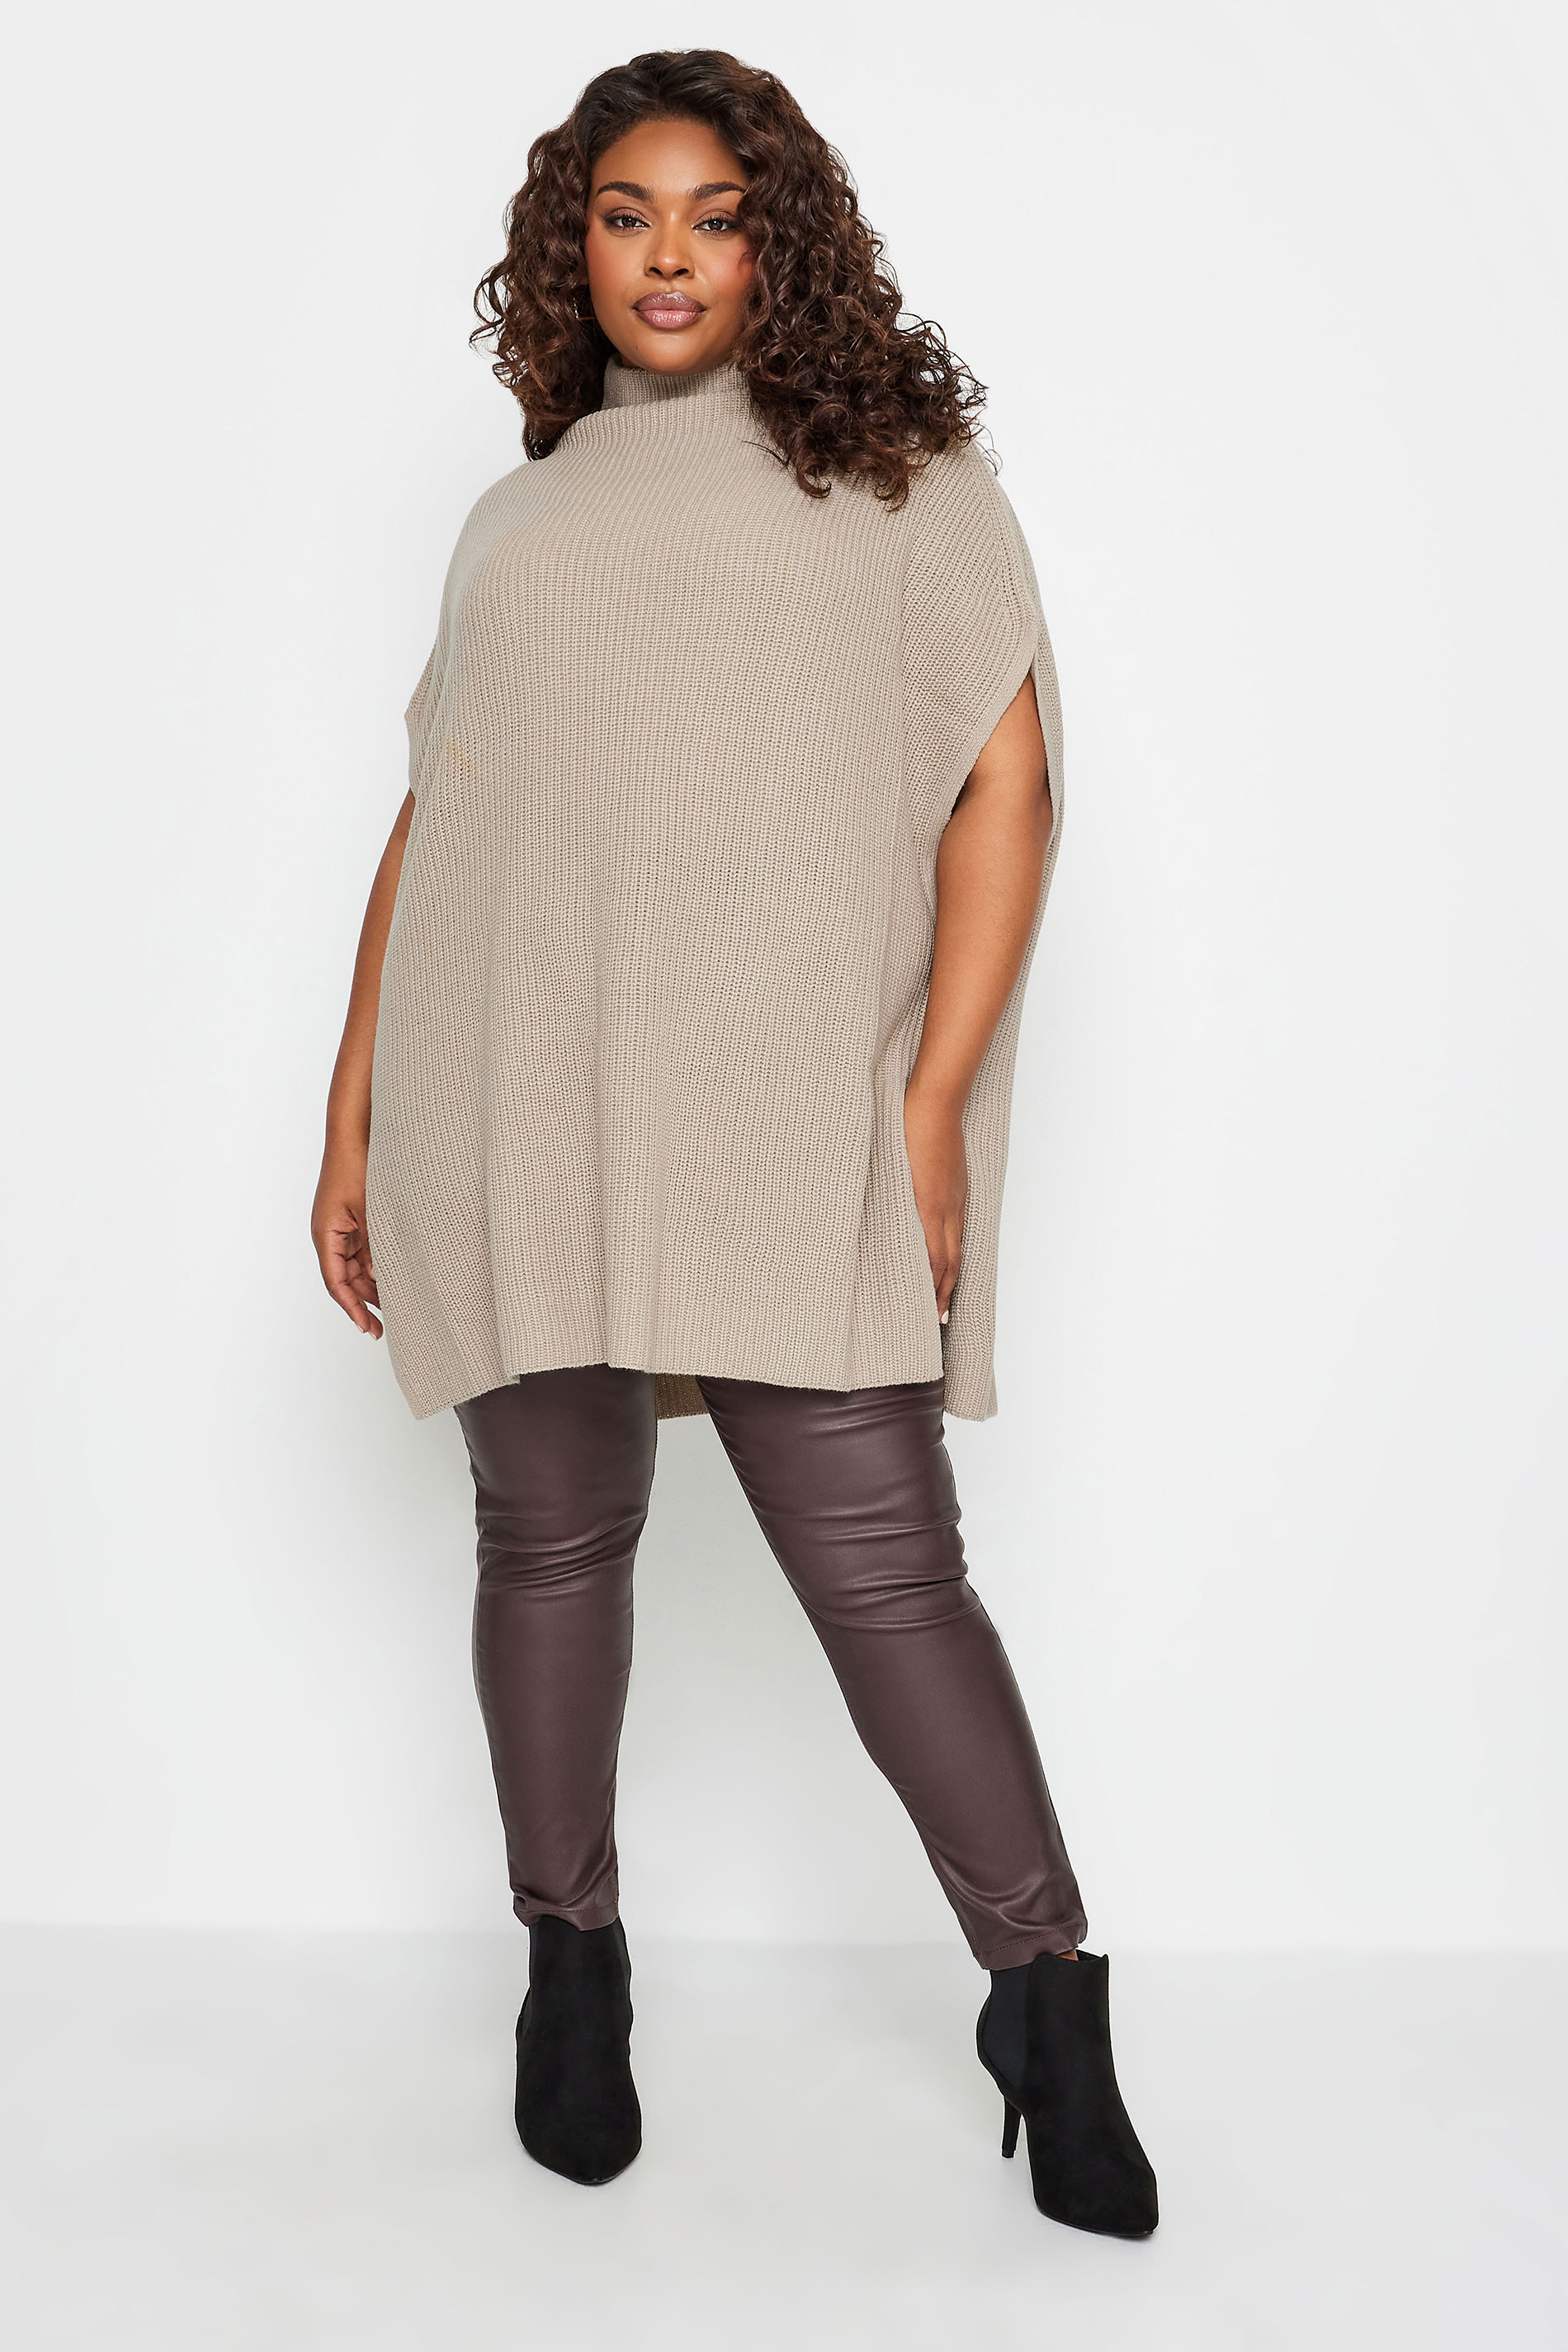 YOURS Plus Size Stone Brown High Neck Knitted Vest Top | Yours Clothing